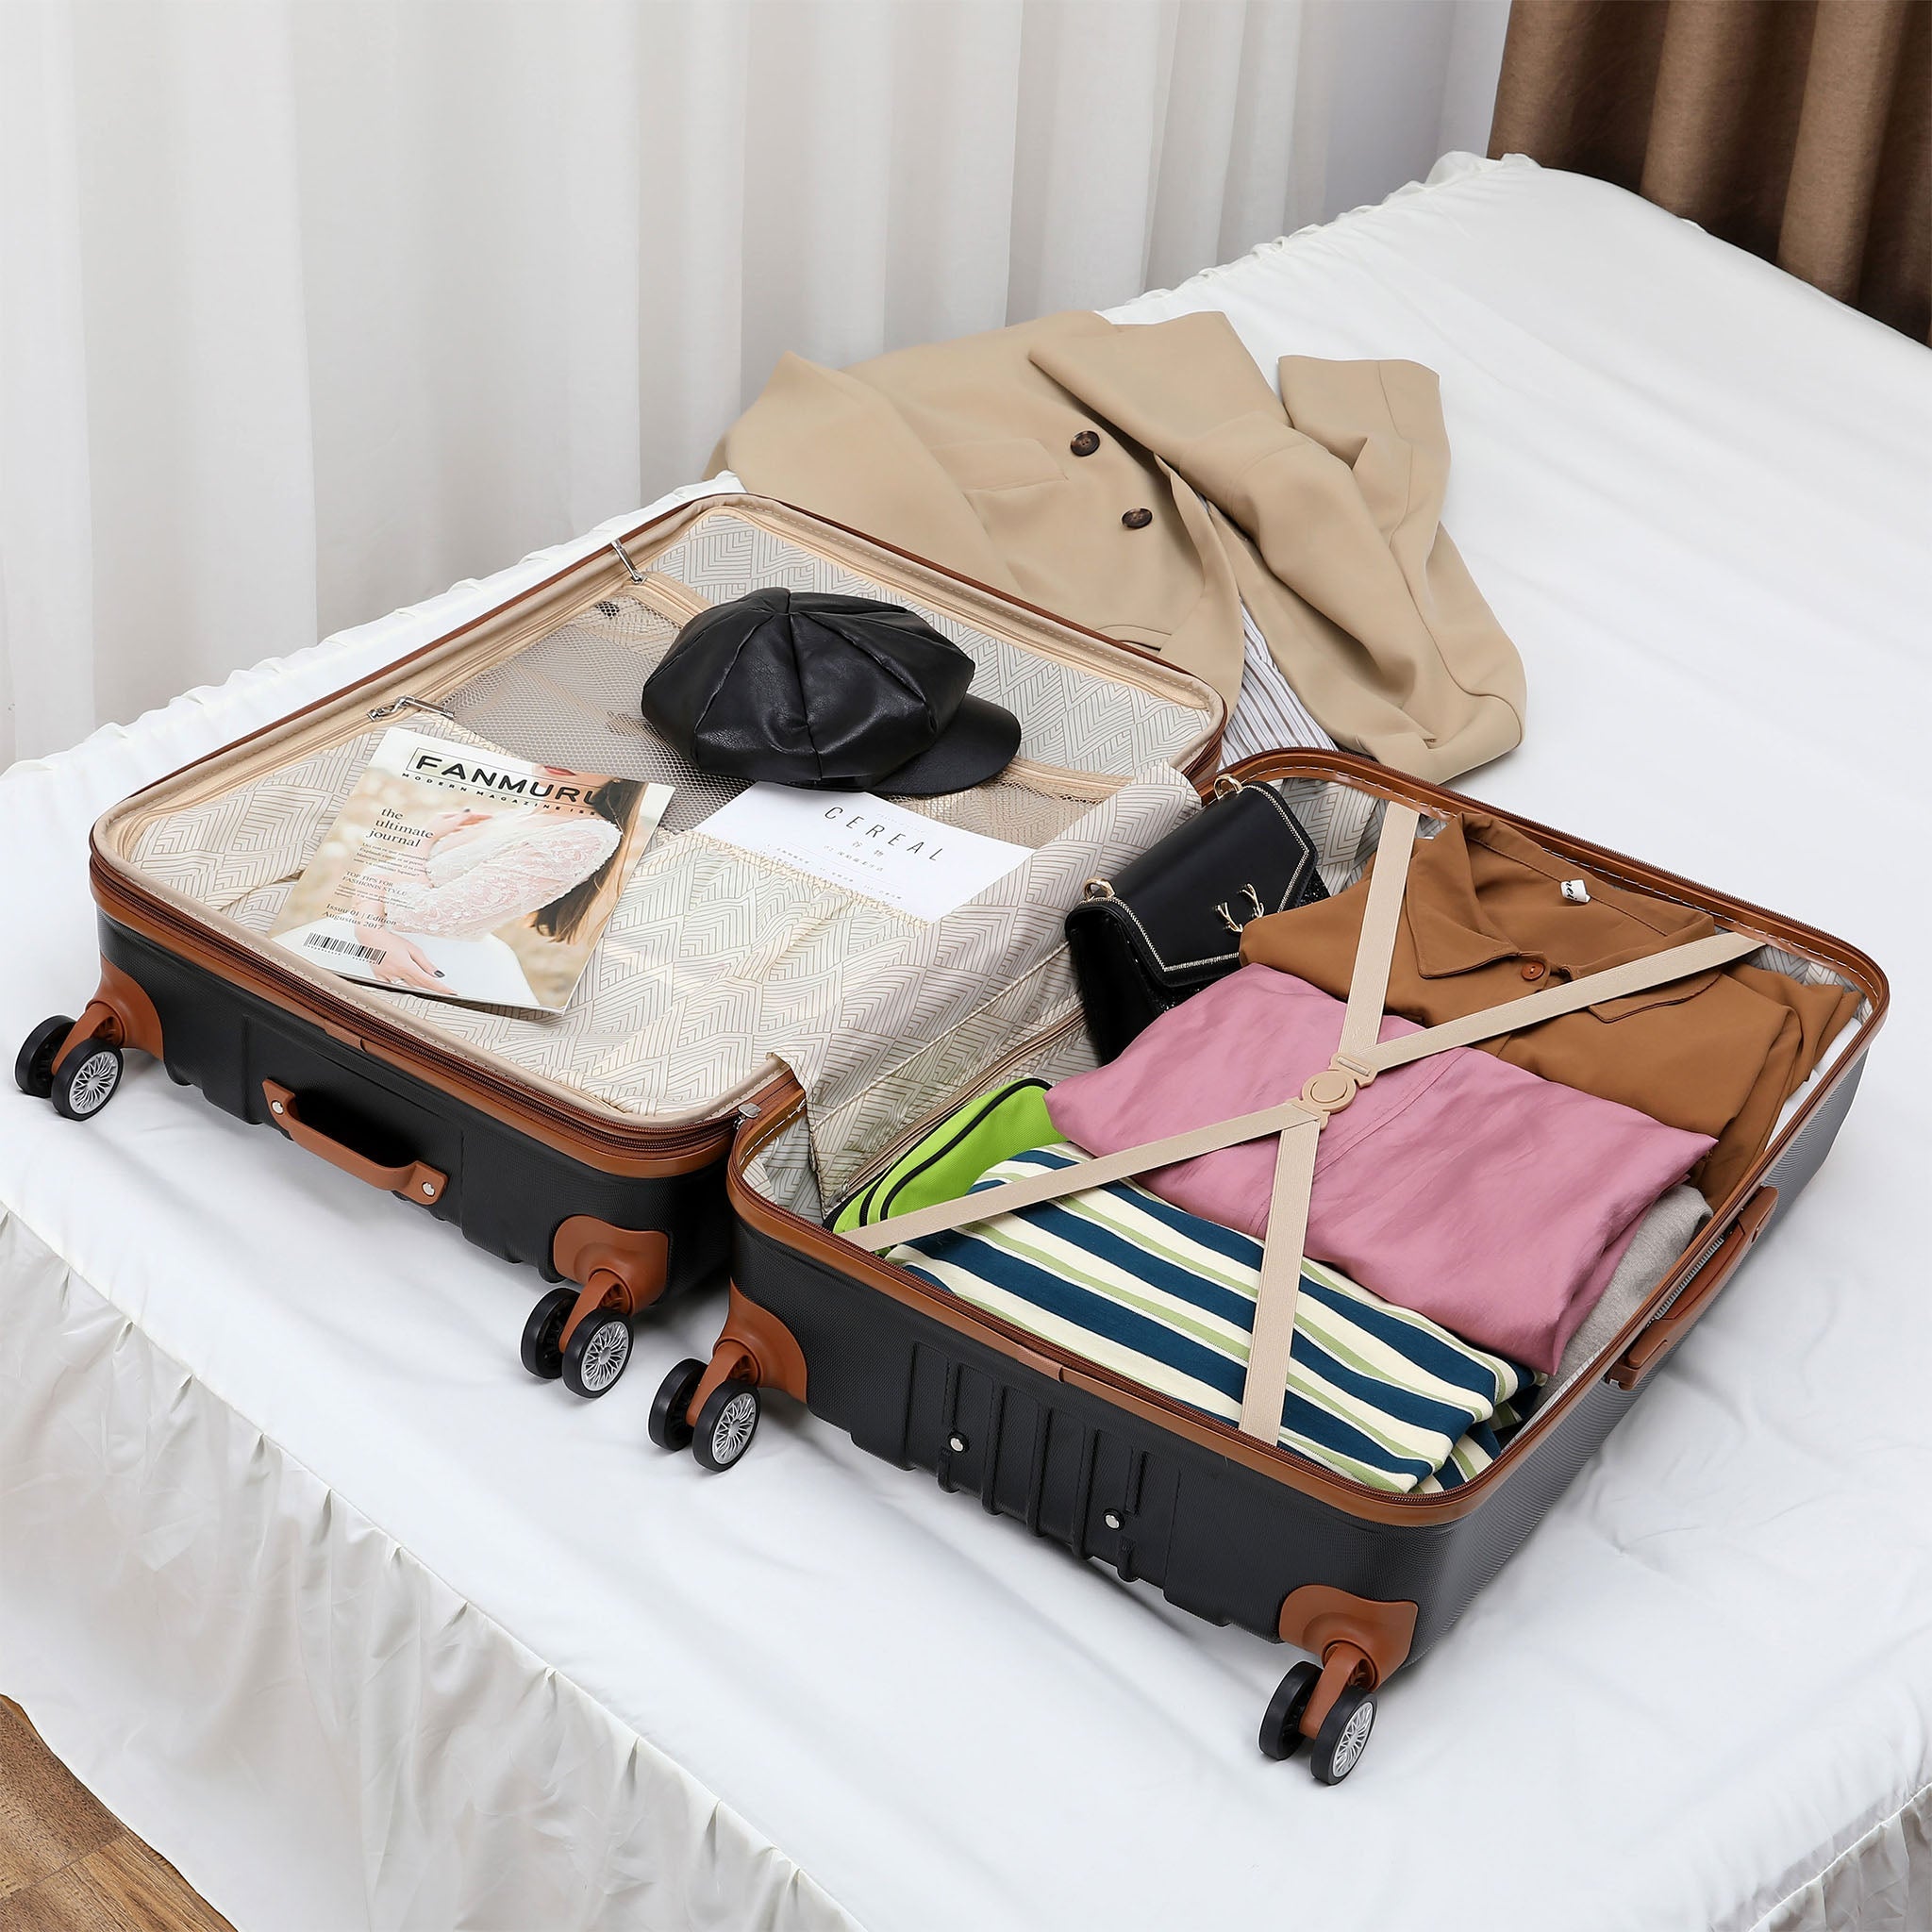 clothing packed in luggage with straps and compartments